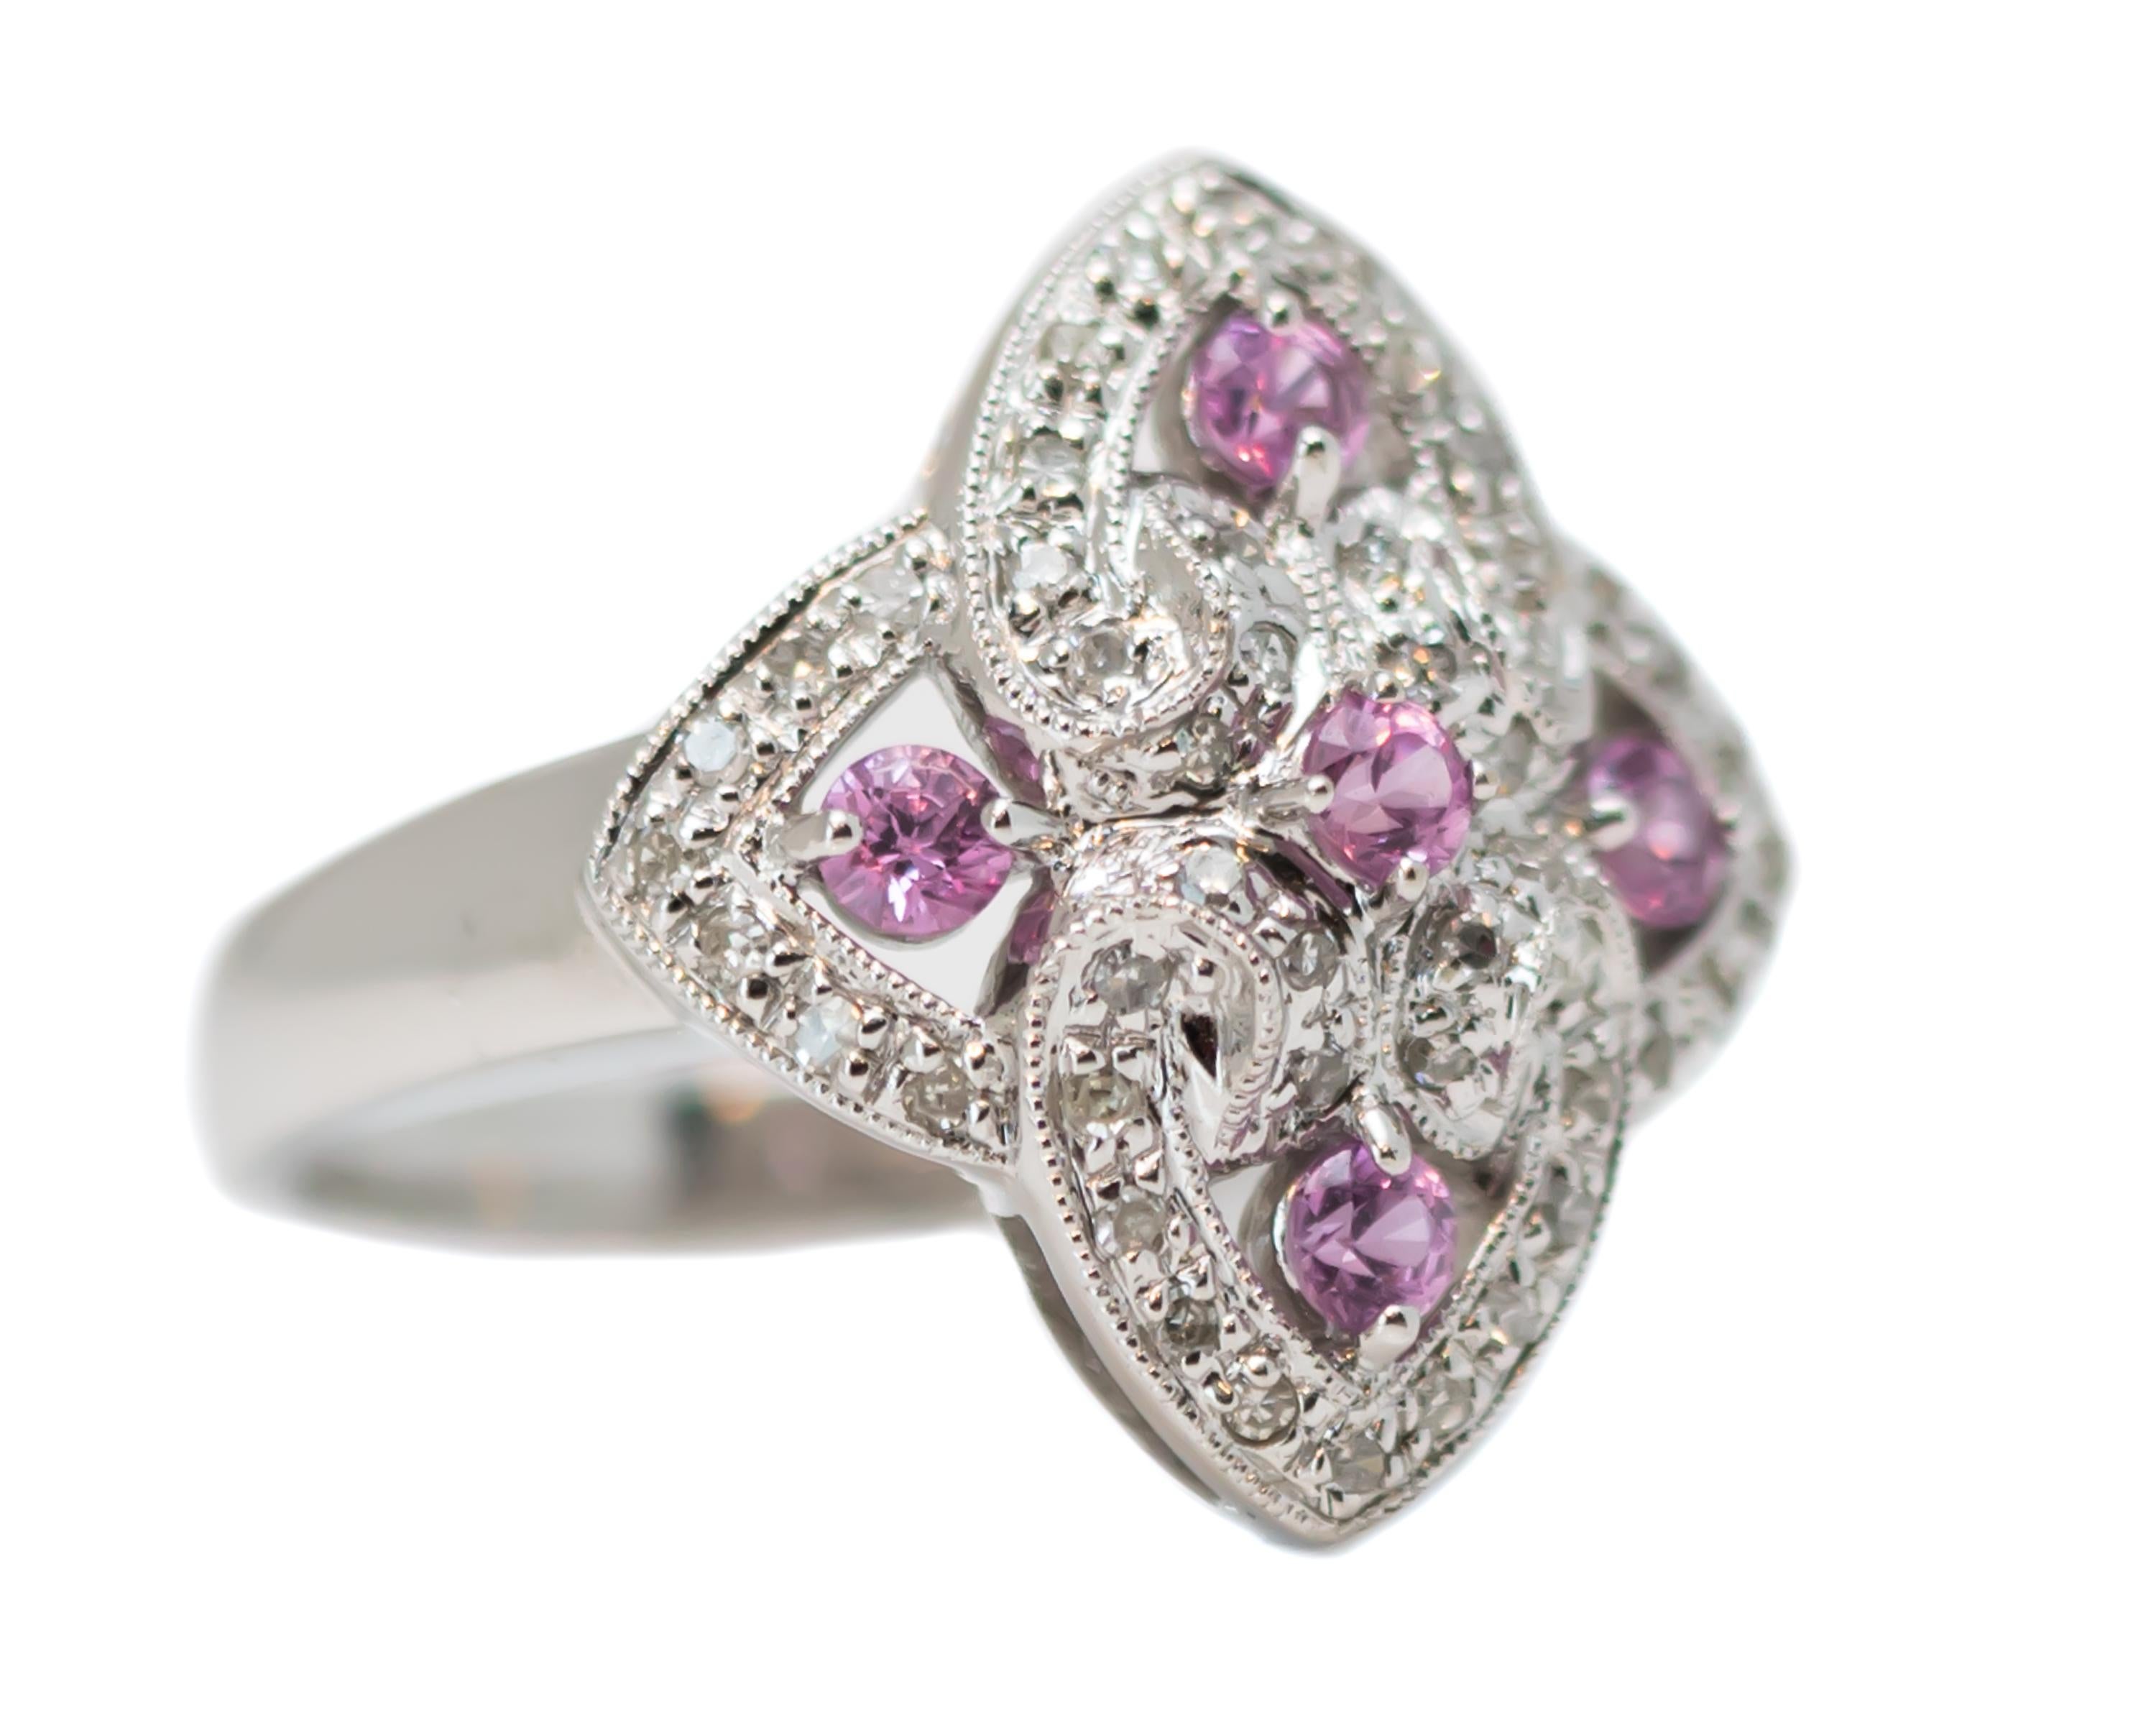 Pink Sapphire and Diamond Ring - 14 Karat White Gold, Pink Sapphires, Diamonds

Features: 
0.50 carat total Round Brilliant Diamonds
0.25 carat total Round Pink Sapphires
14 karat White Gold 
4-interlocking heart  design
5 pink sapphires surrounded